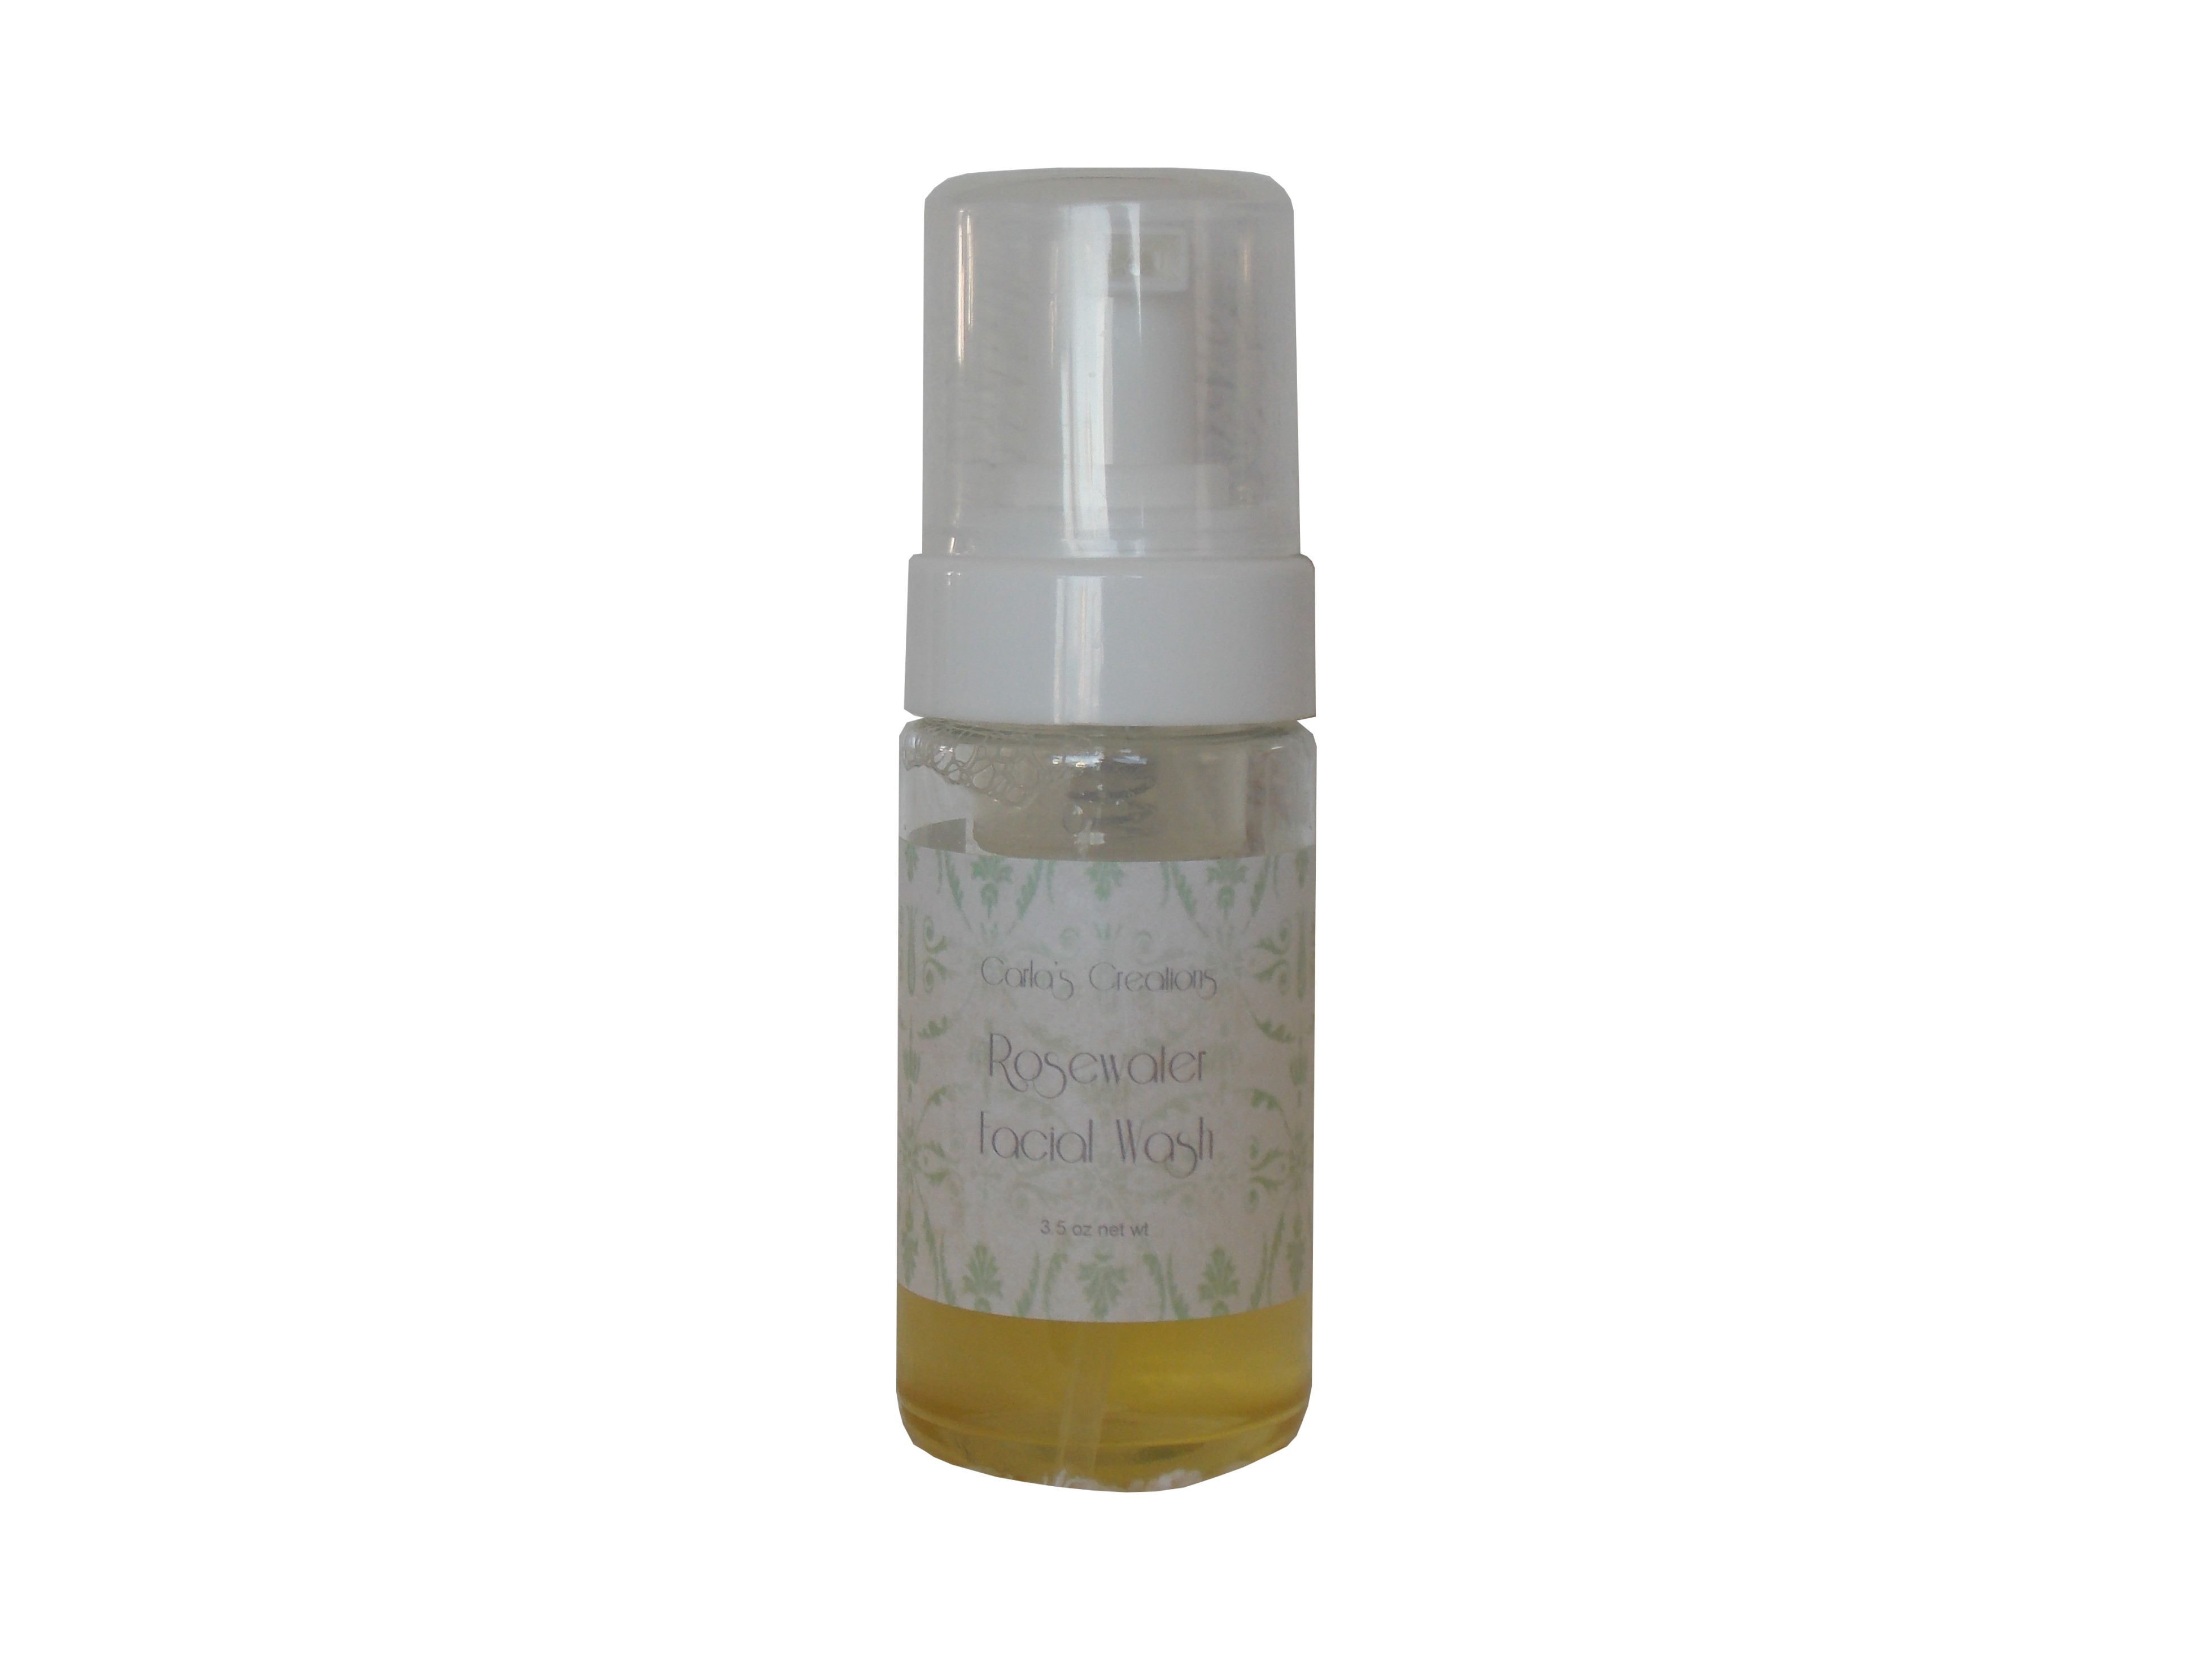 Rosewater Foaming Face Wash